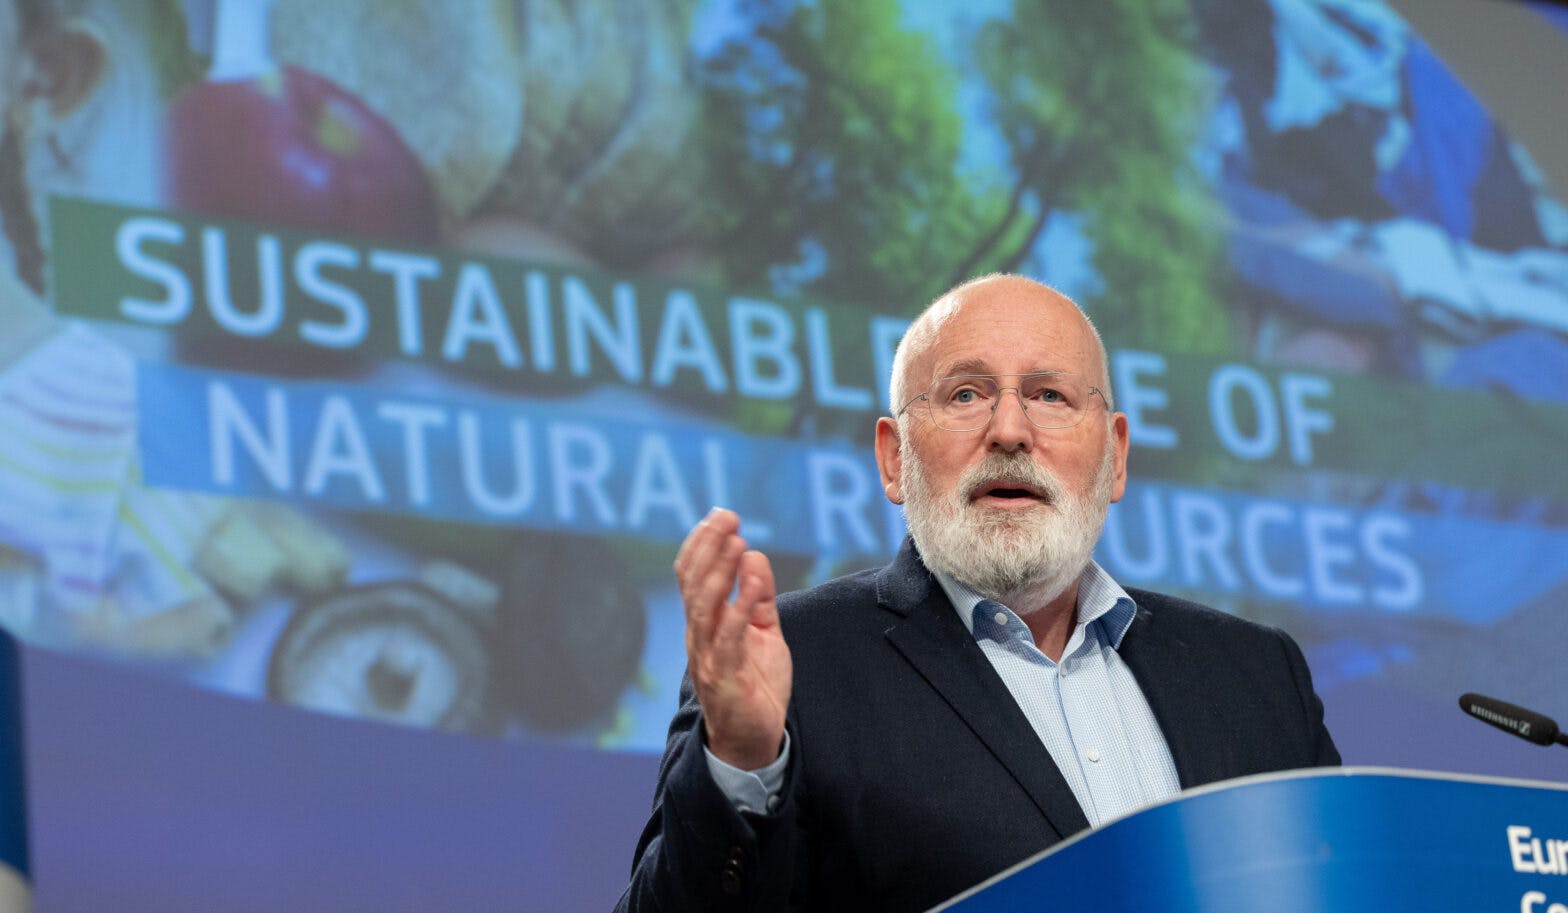 Press conference by Frans Timmermans, Executive Vice-President of the European Commission, and Virginijus Sinkevicius, European Commissioner, on the sustainable use of natural resources